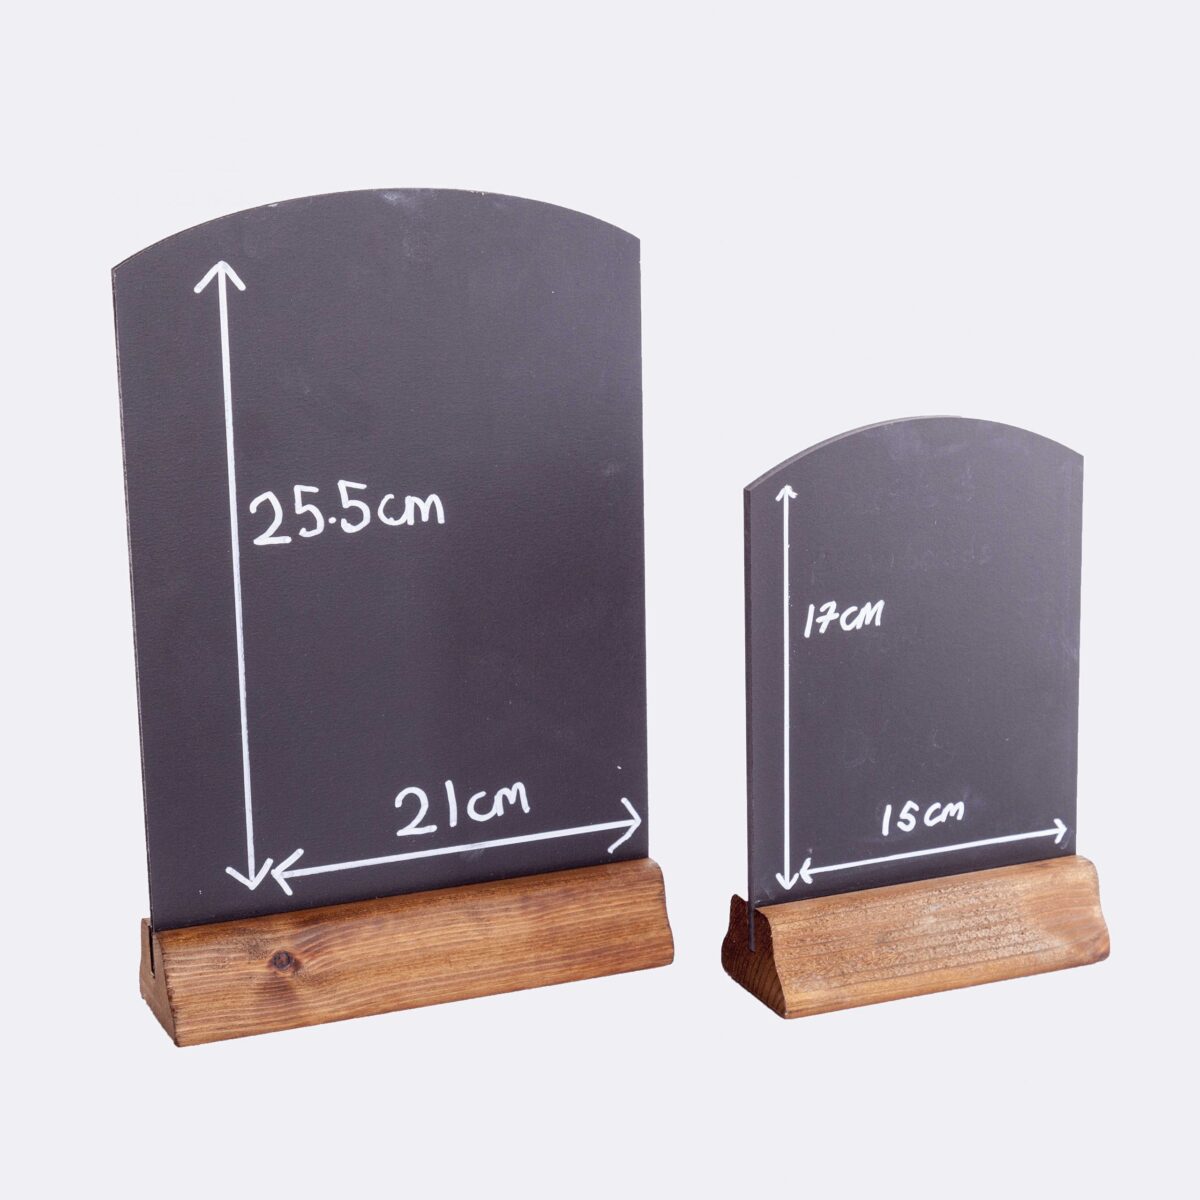 A5 Table Top Chalkboard with Wooden Base